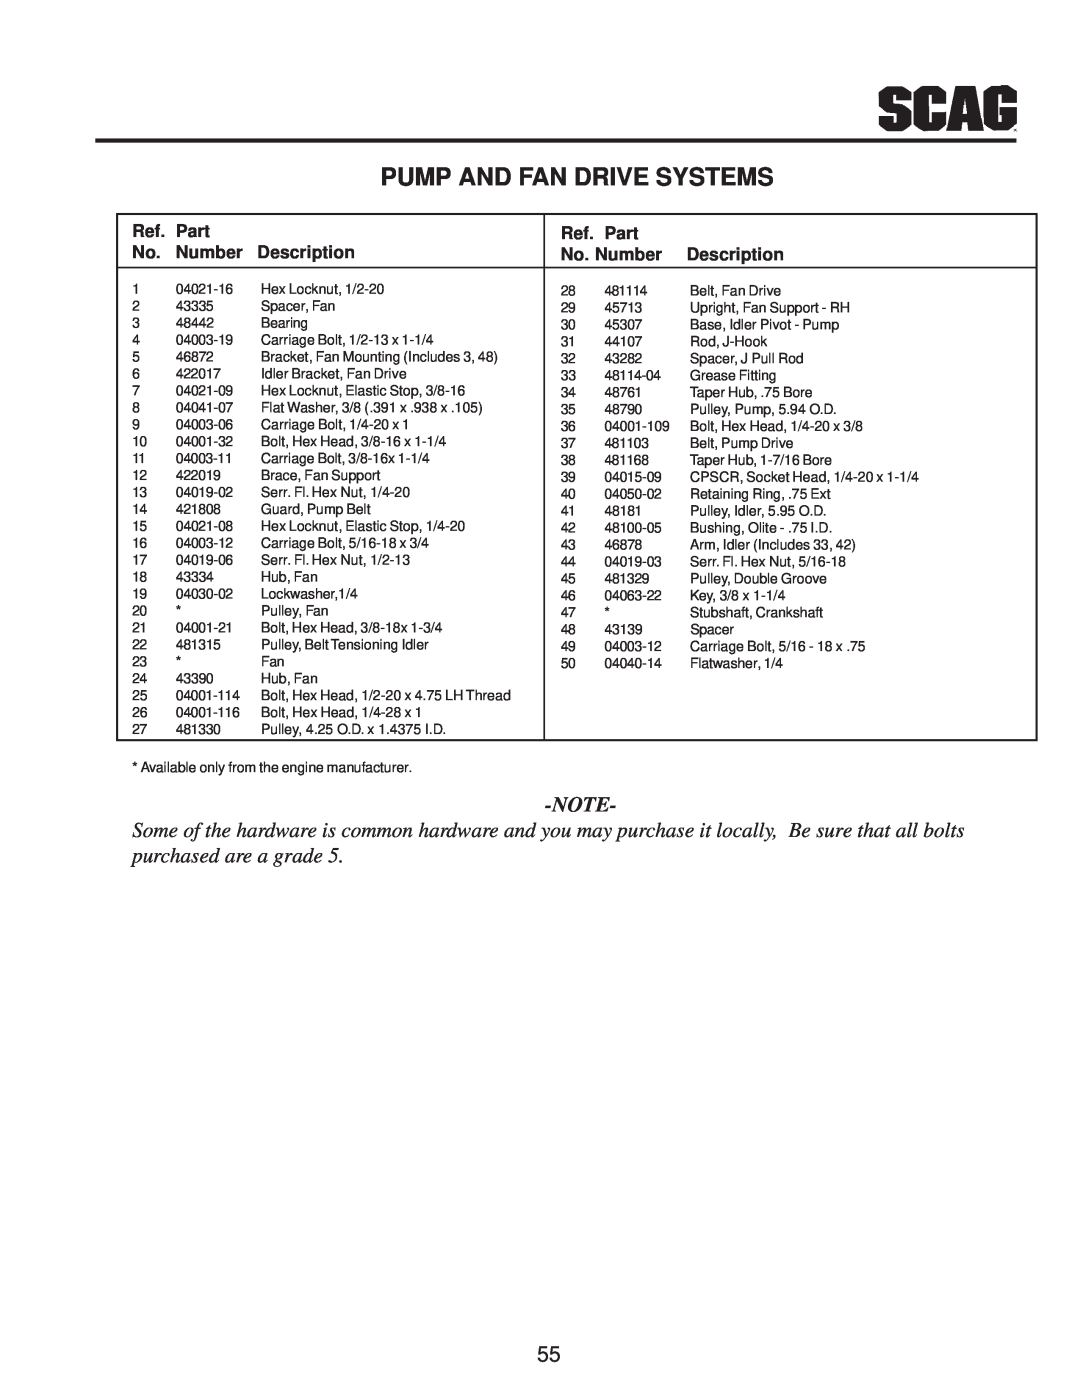 Scag Power Equipment MAG manual Pump And Fan Drive Systems, Ref. Part, Description, No. Number 